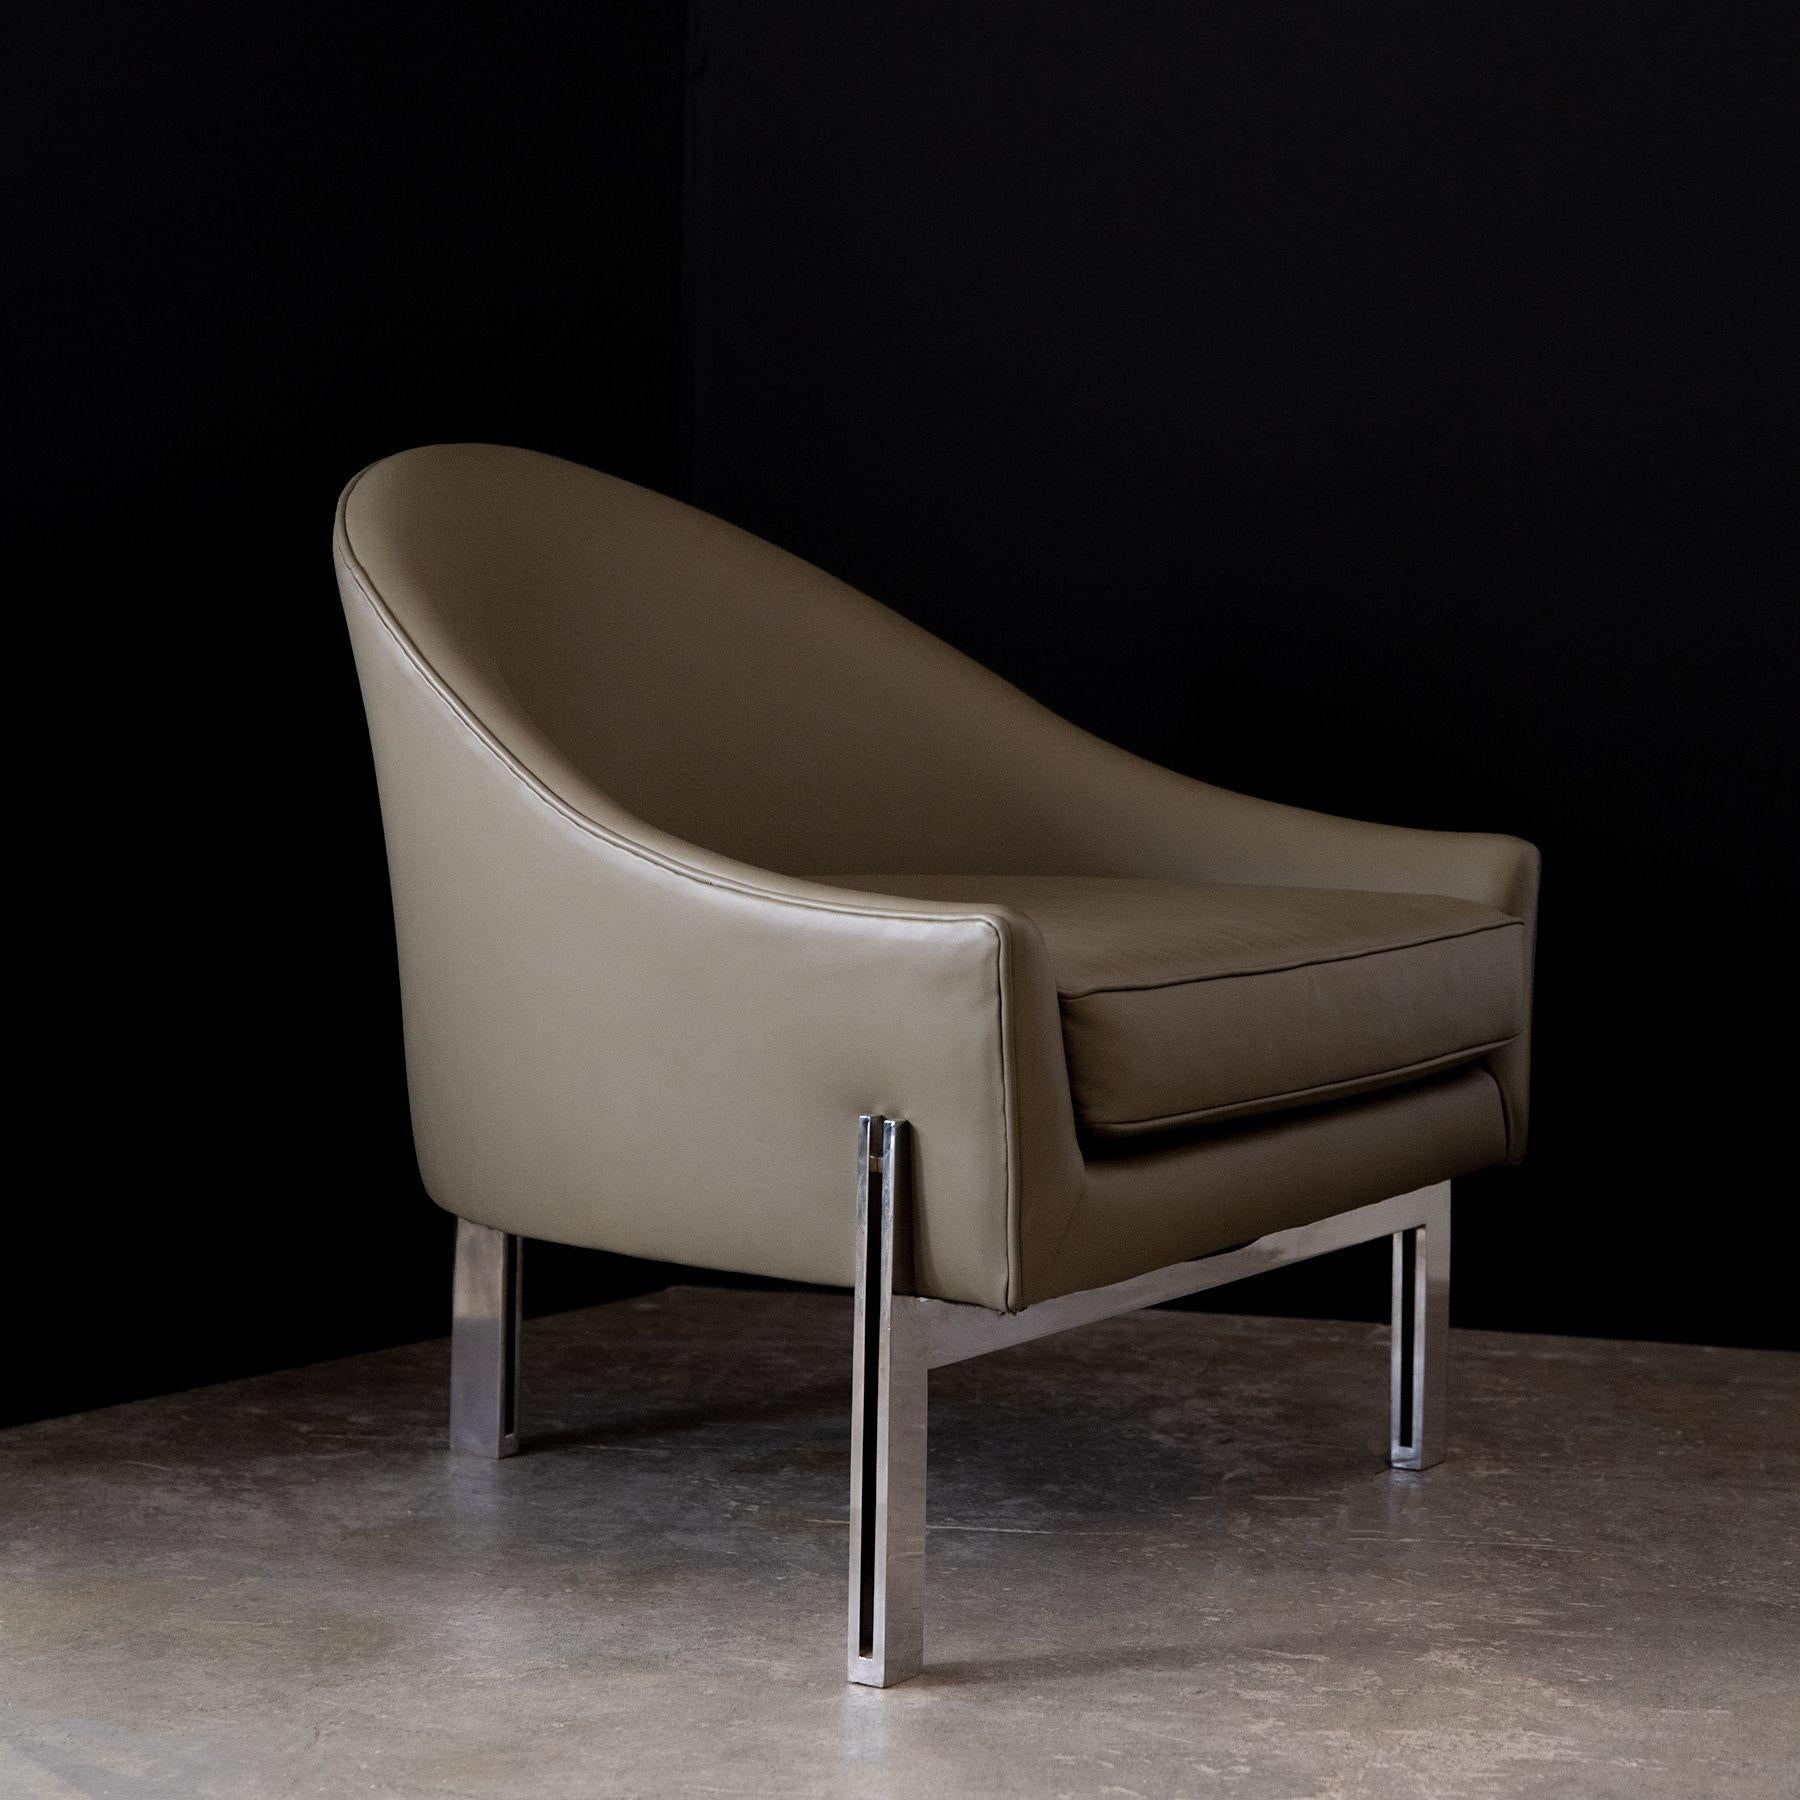 These arch-back club chairs were designed by Edward Axel Roffman and commissioned in the 1960s by Atlas Steel in Chicago. This design was typically made with wood legs but these examples are constructed with solid polished flat bar stainless steel